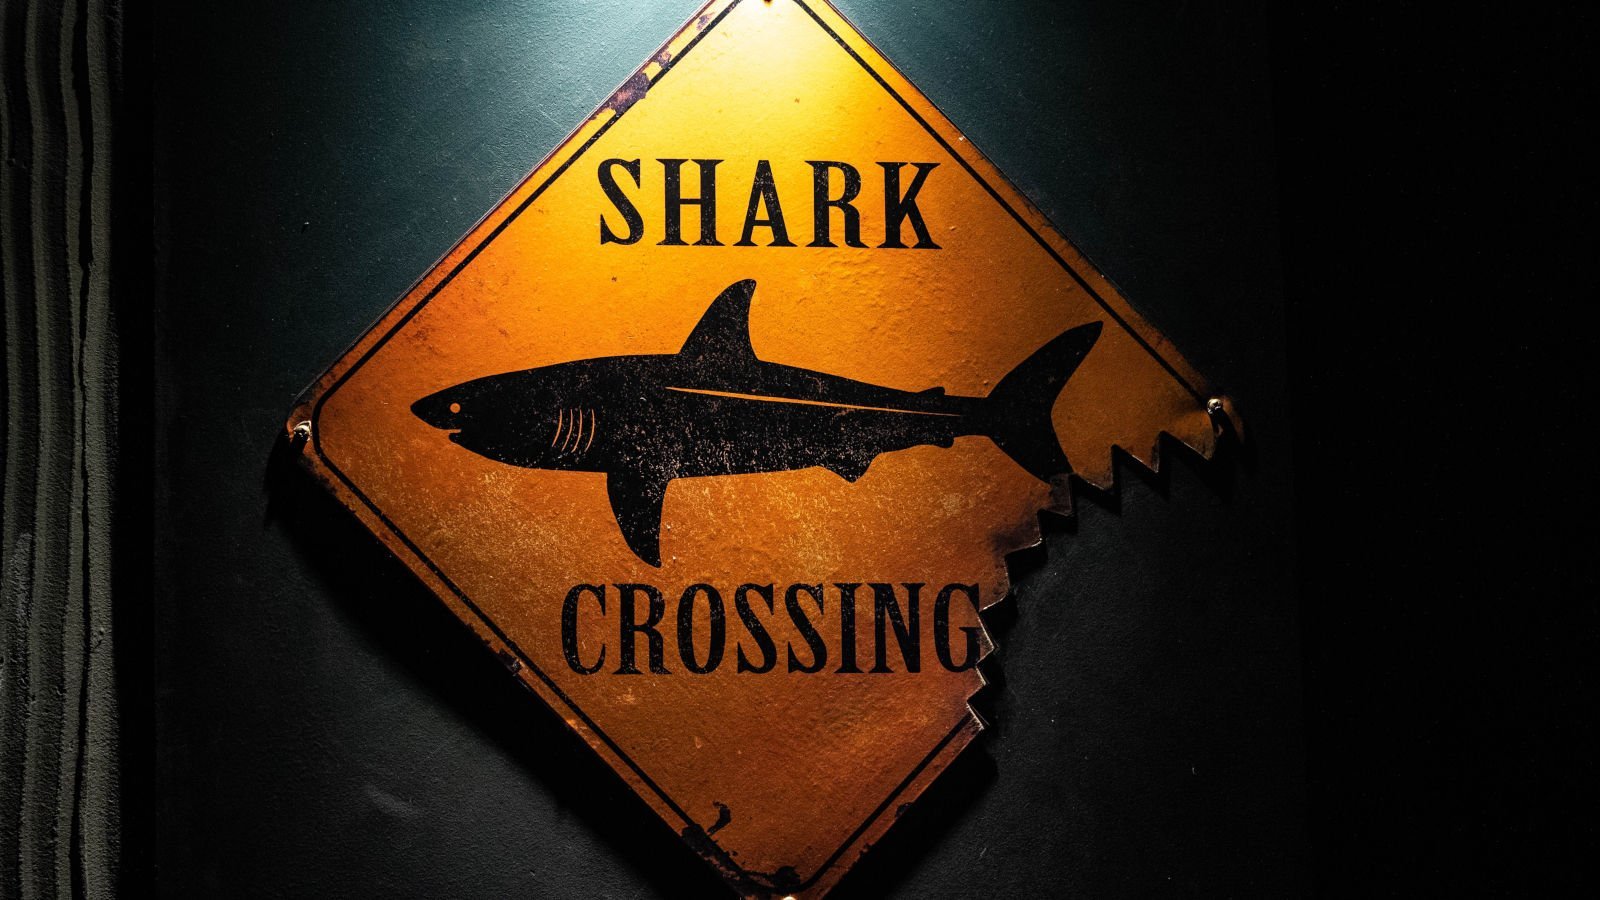 SharkBot malware is back on Google Play stealing your logins